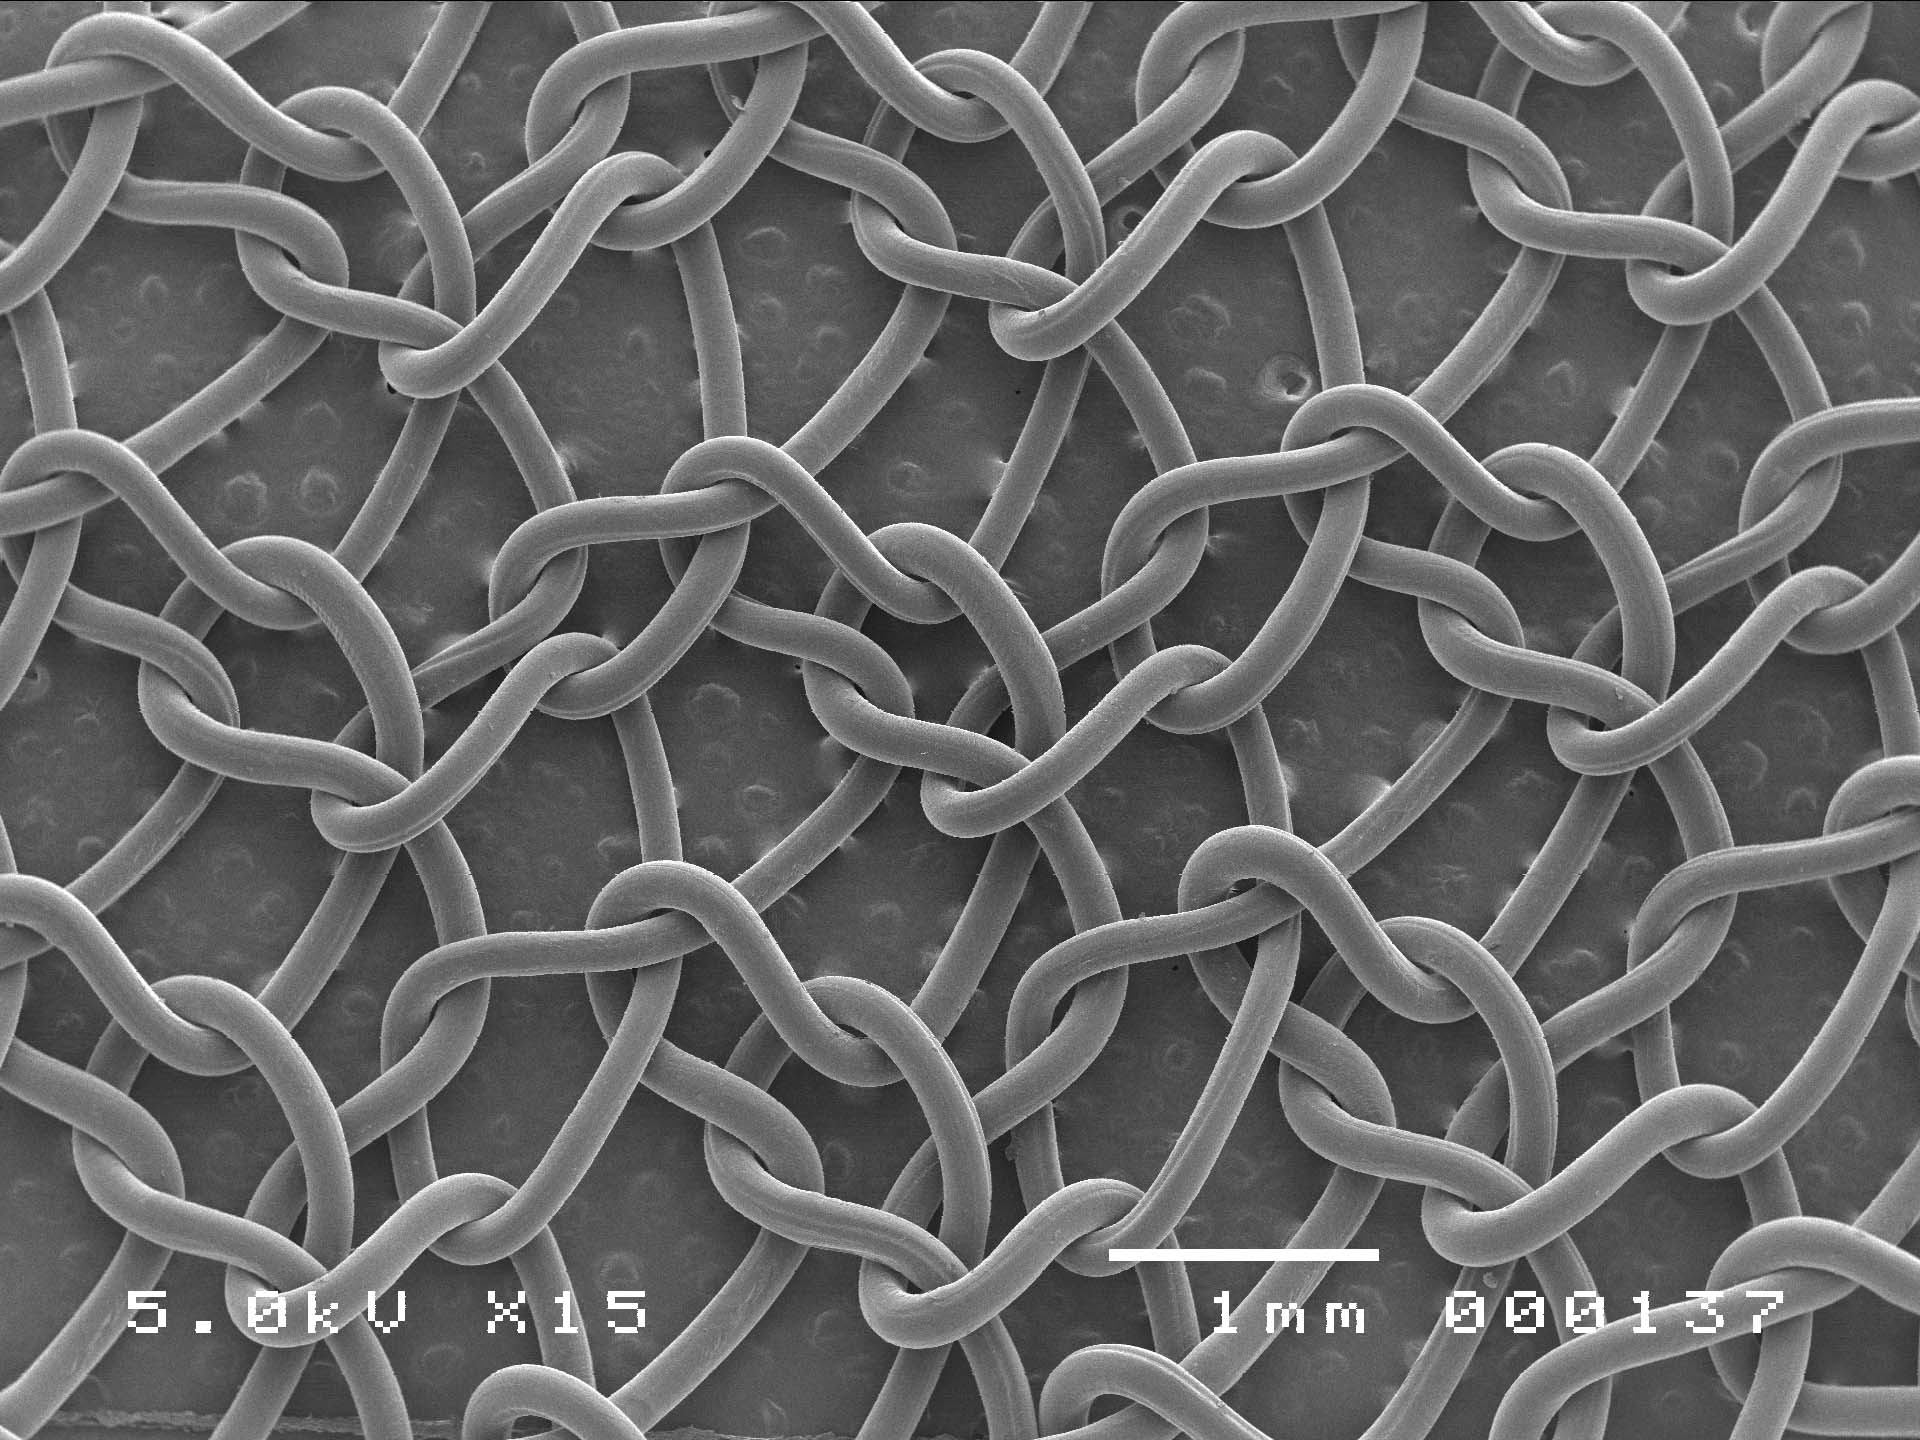 Scanning Electron Microscope photomicrograph of TephaFLEX Surgical Mesh (magnification 15 times).